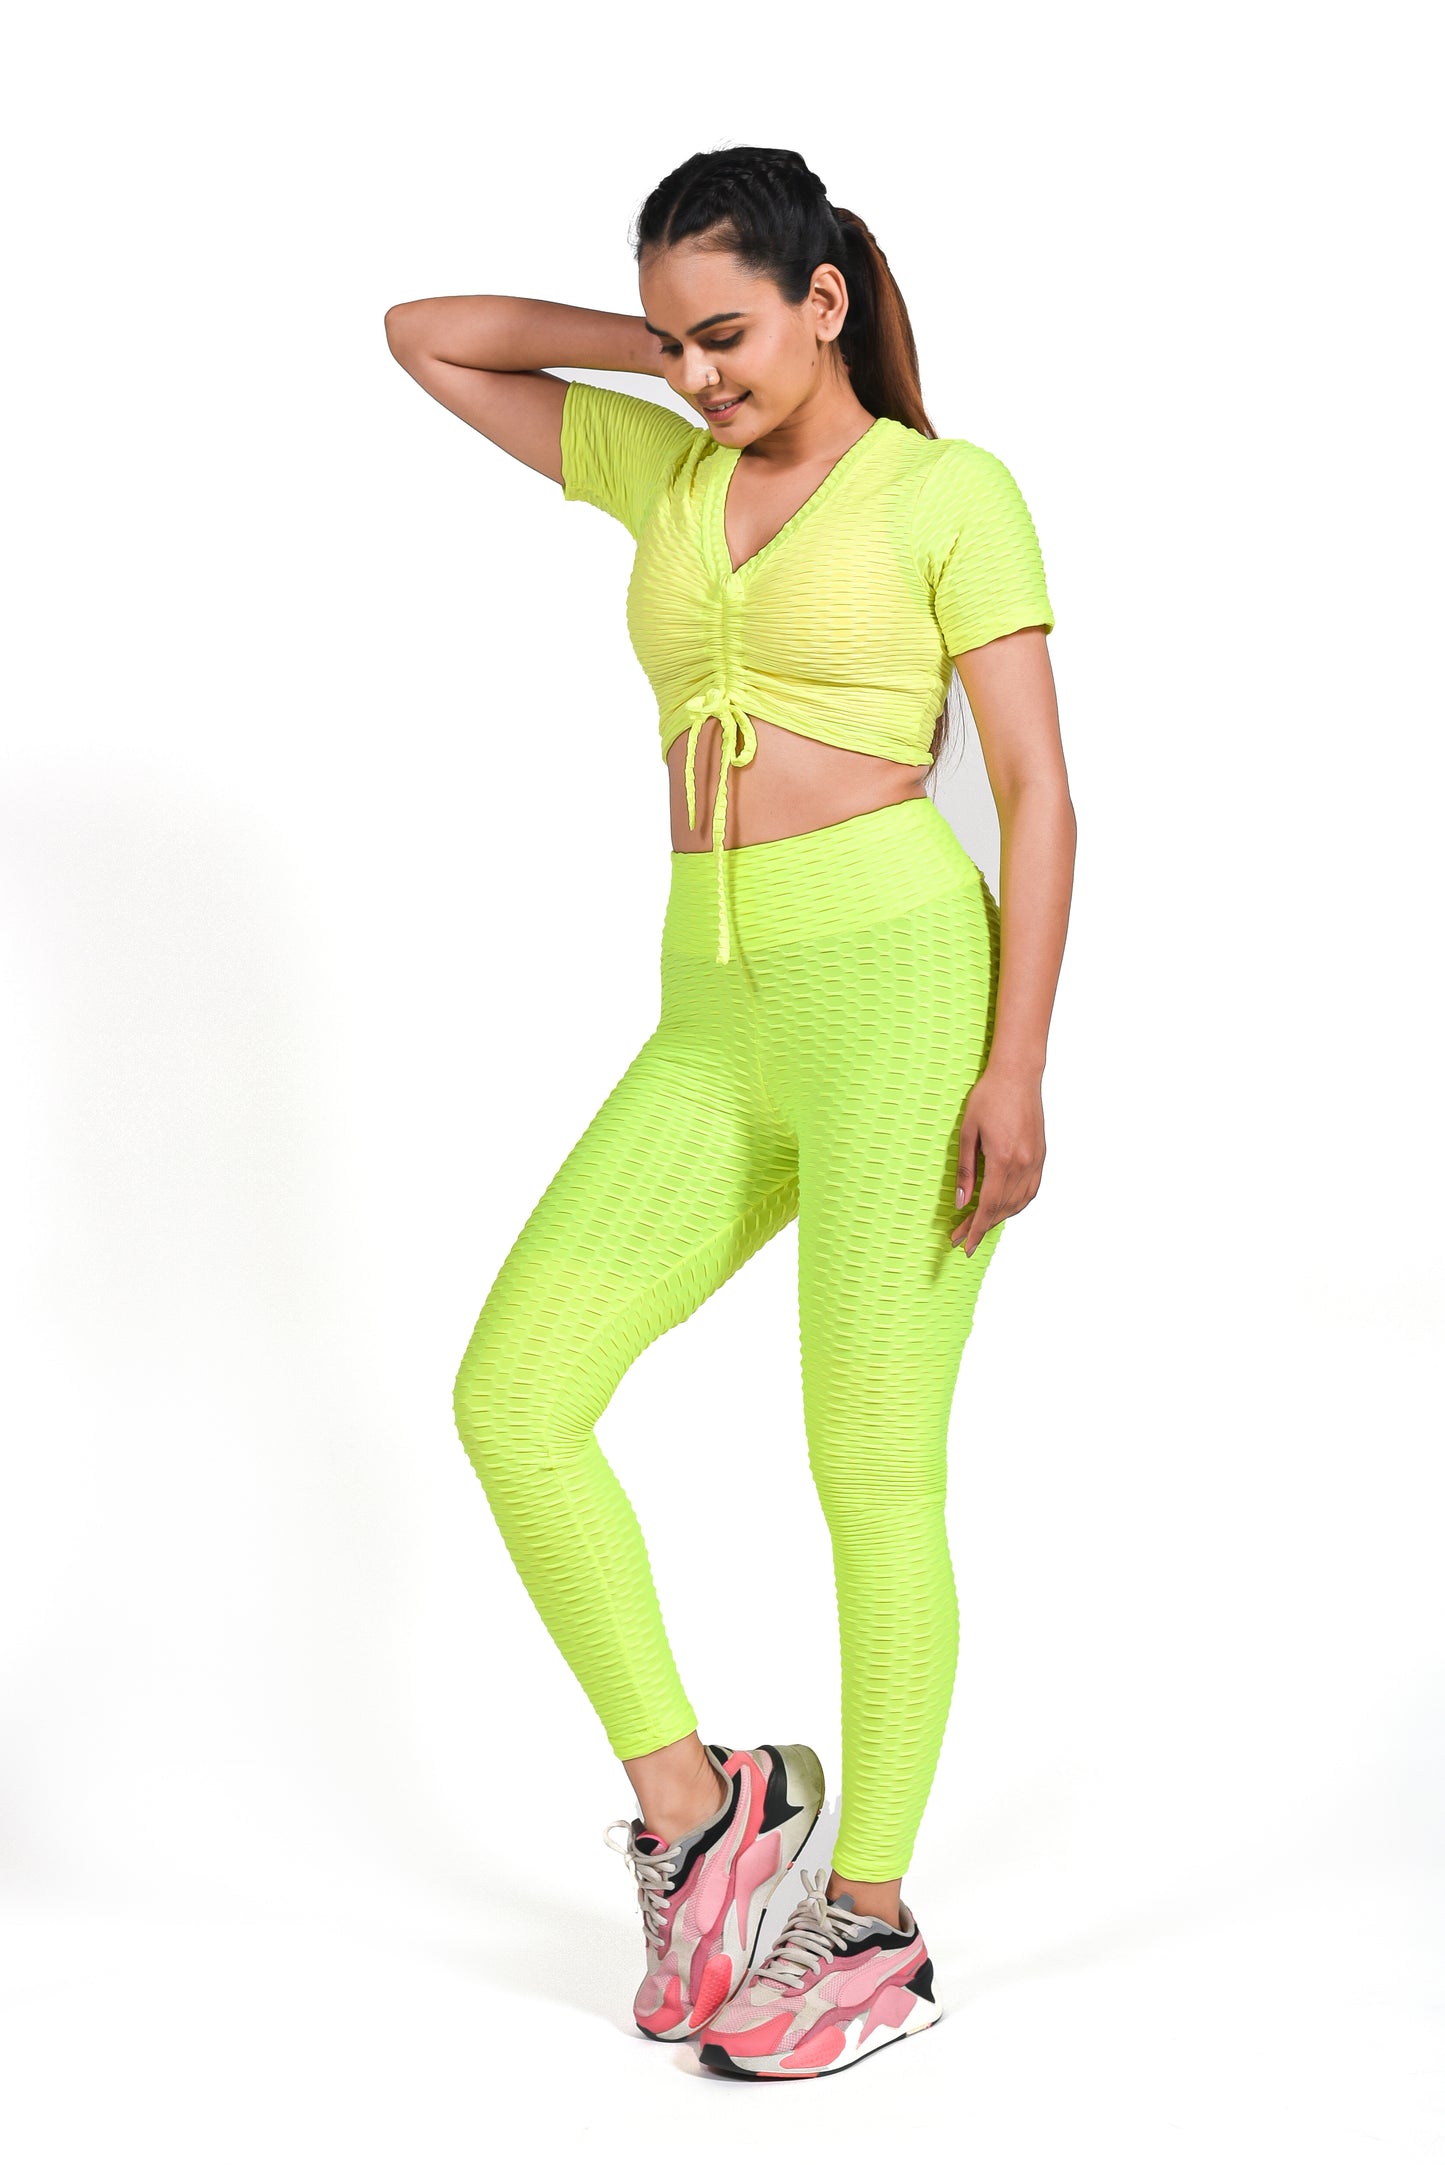 Load image into Gallery viewer, GYMSQUAD® PUSH UP LEGGINGS - YELLOW / NEON Green
